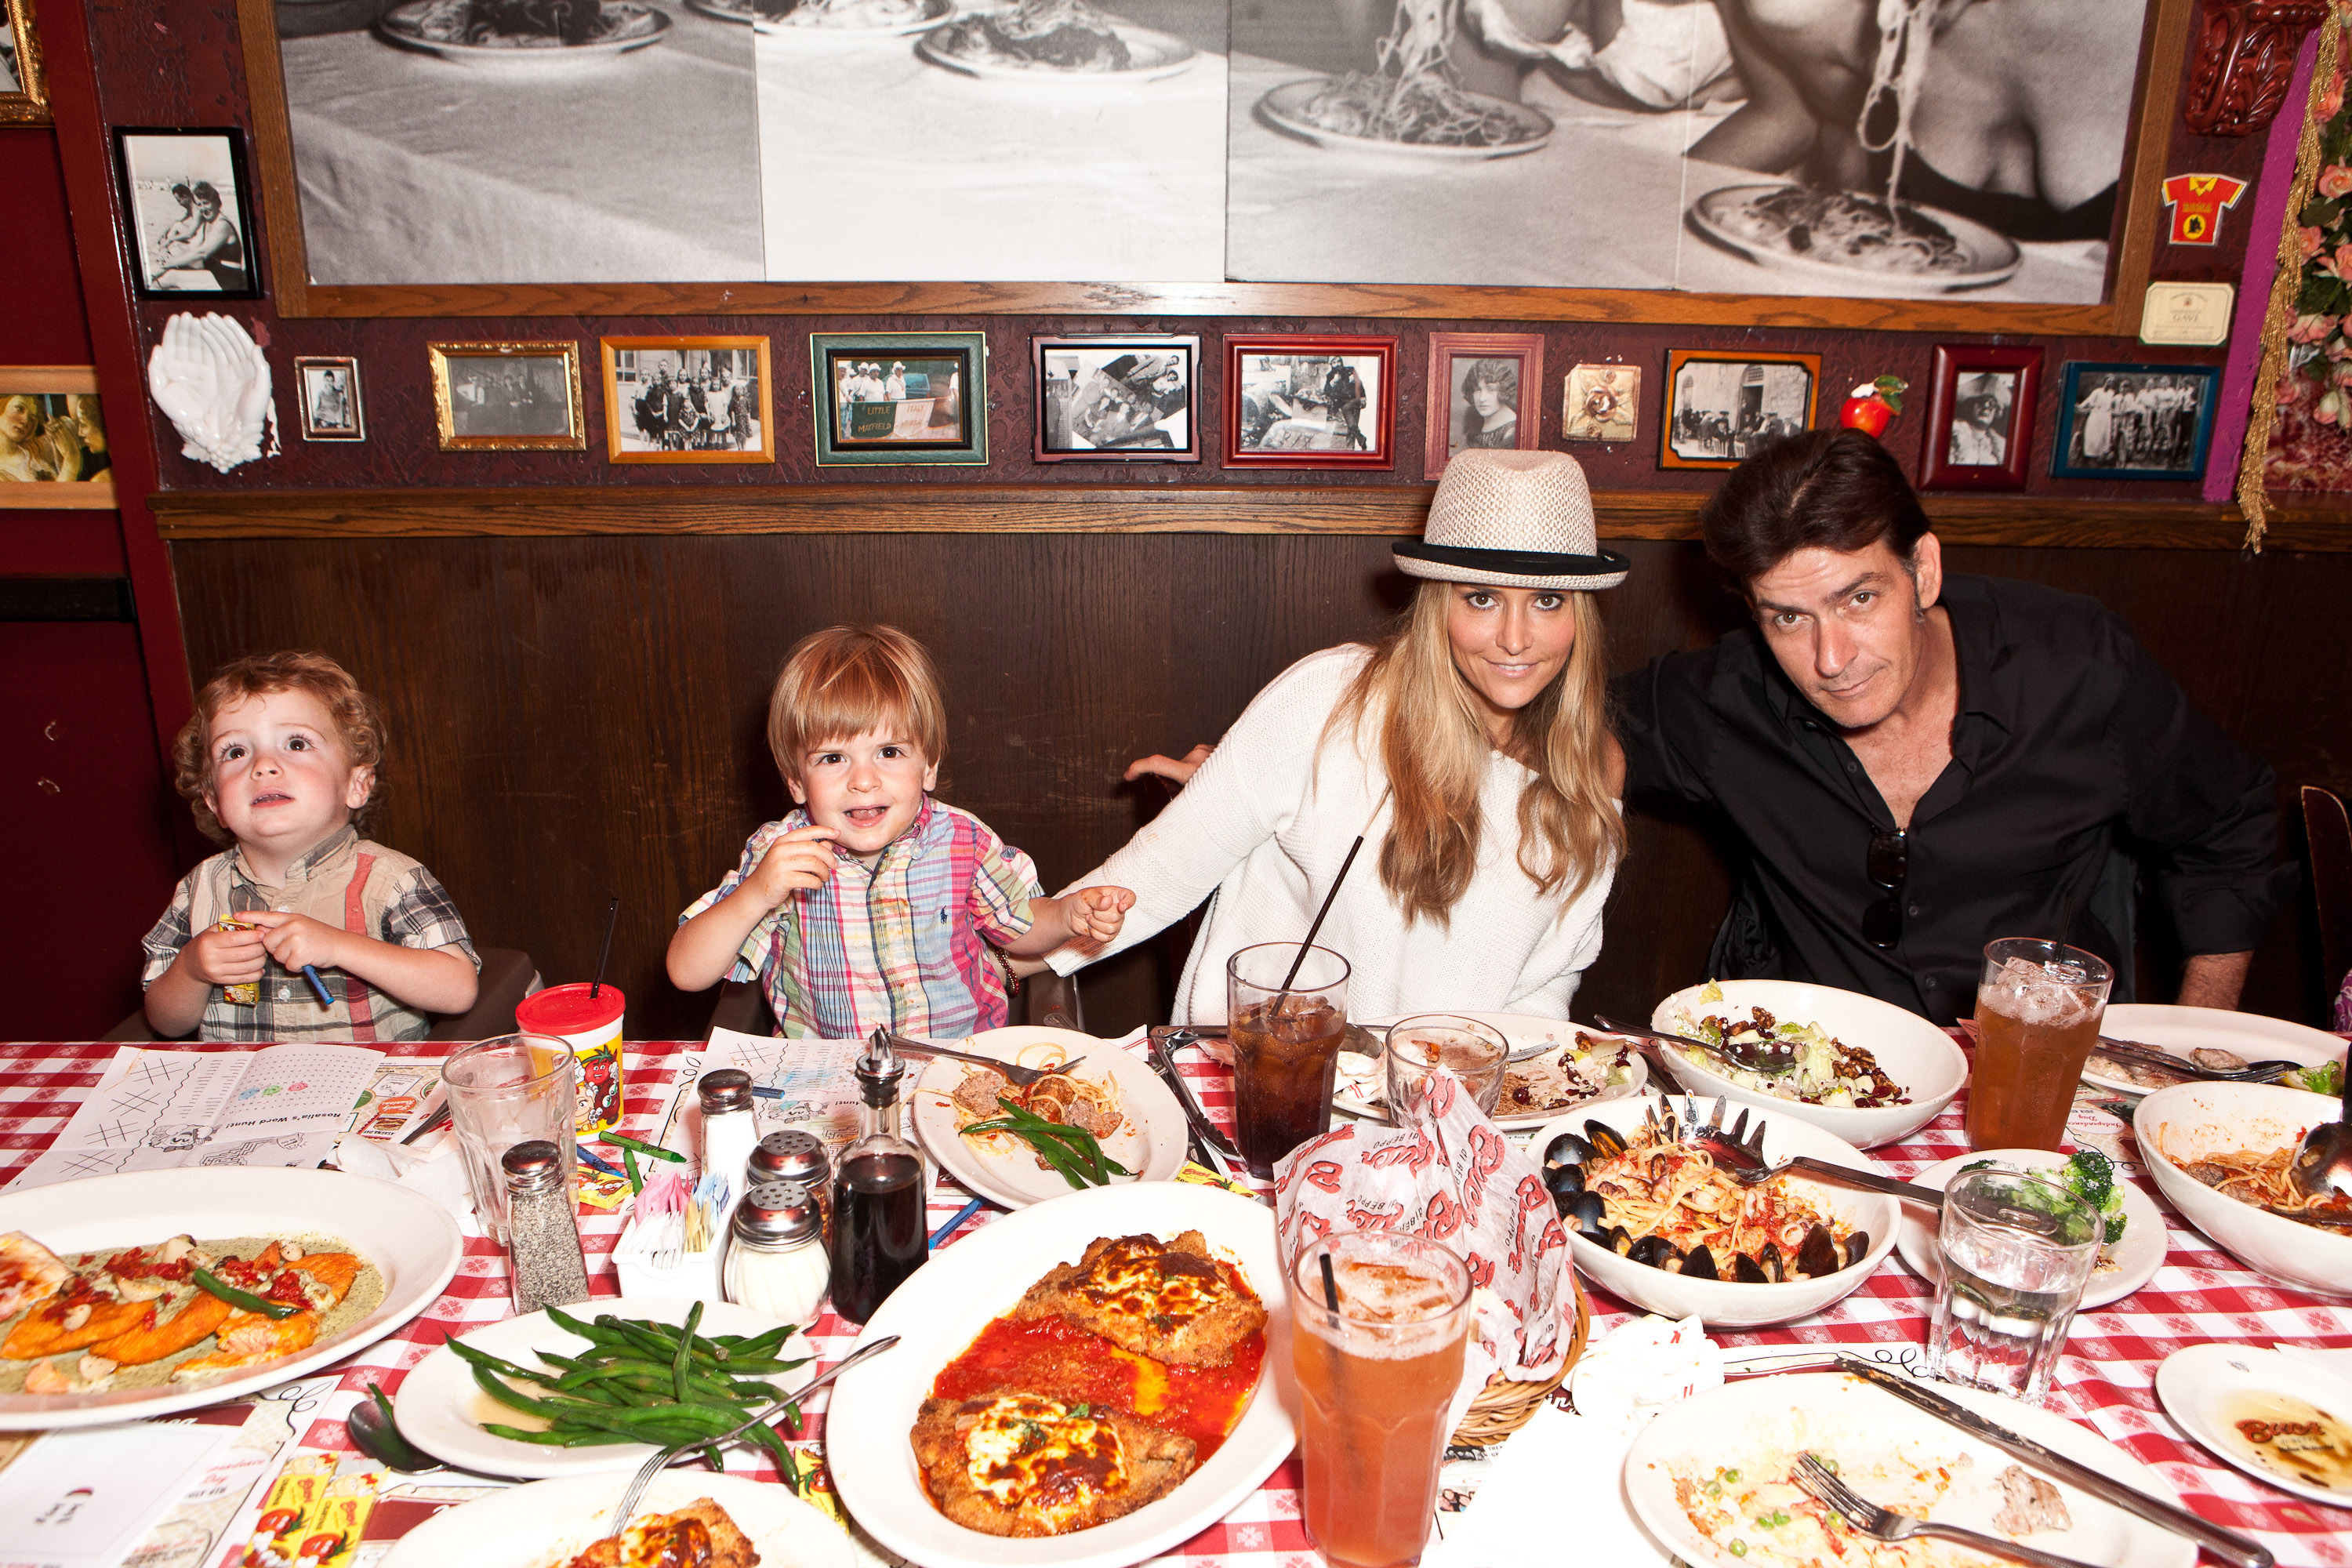 Charlie Sheen, Brooke Mueller, and their sons Max and Bob Sheen celebrate Charlie's birthday at Buca di Beppo on September 3, 2011, in Encino, California | Source: Getty Images